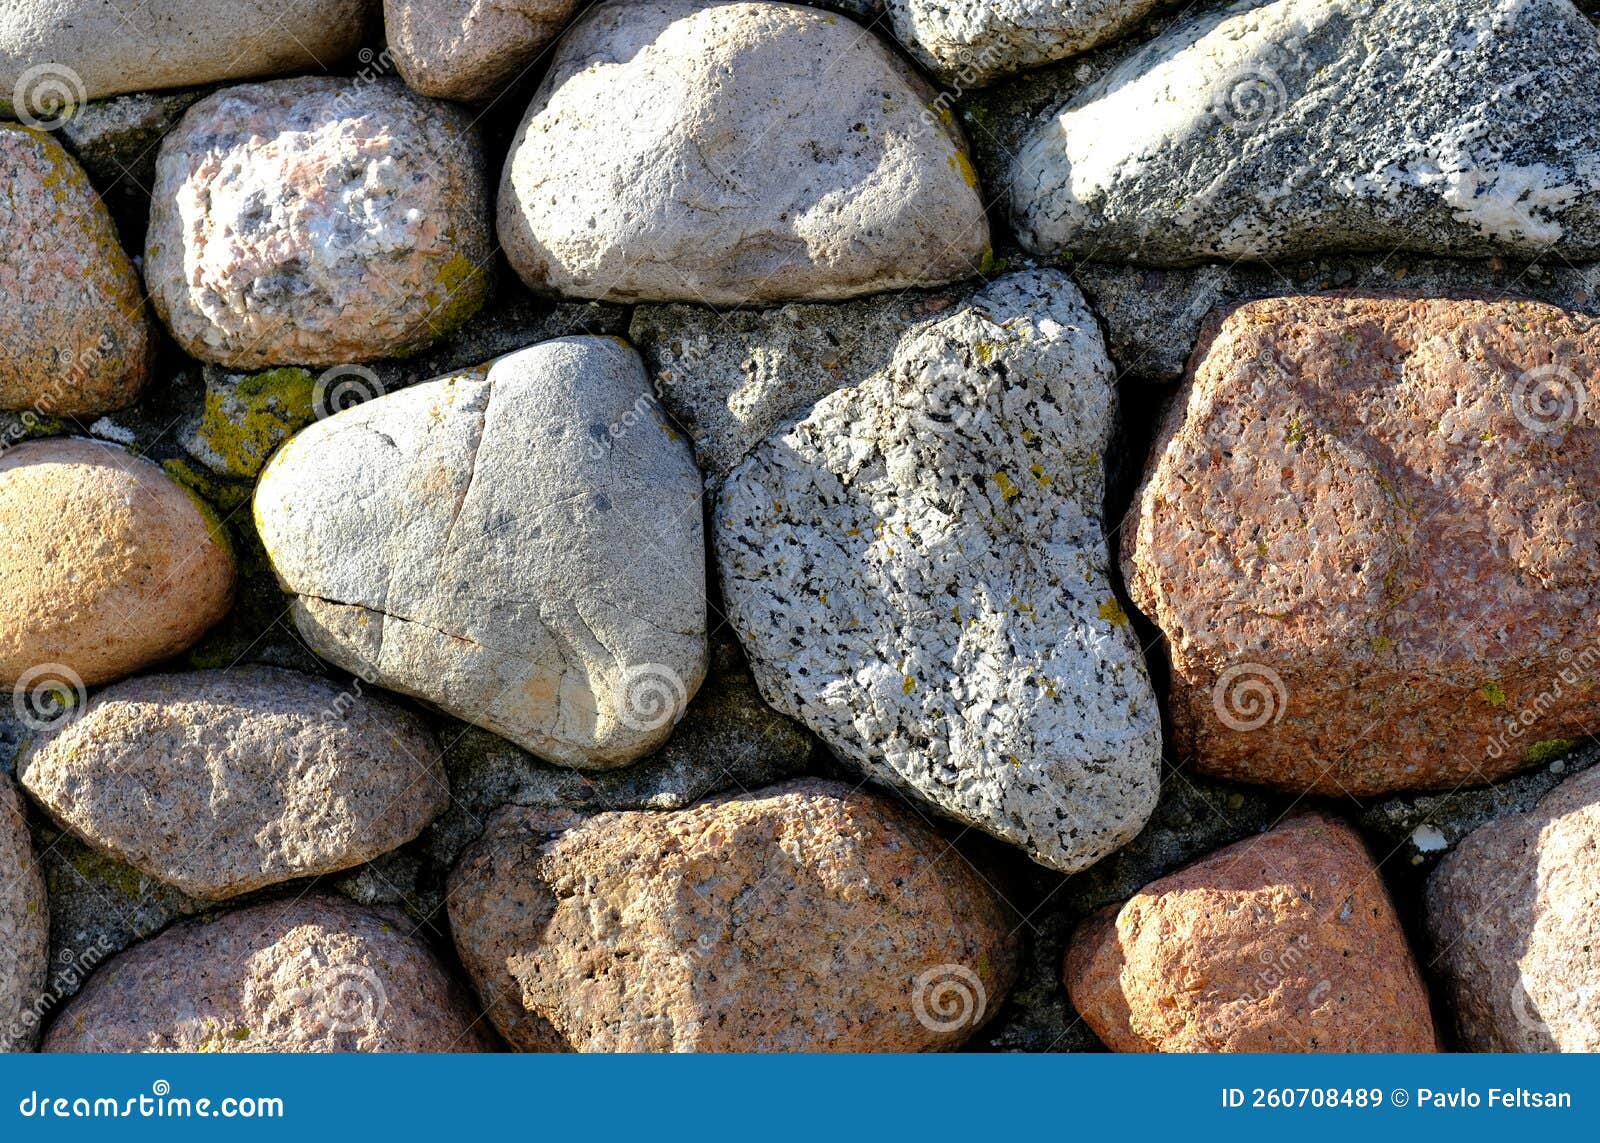 background with natural stones reflected in a photograph